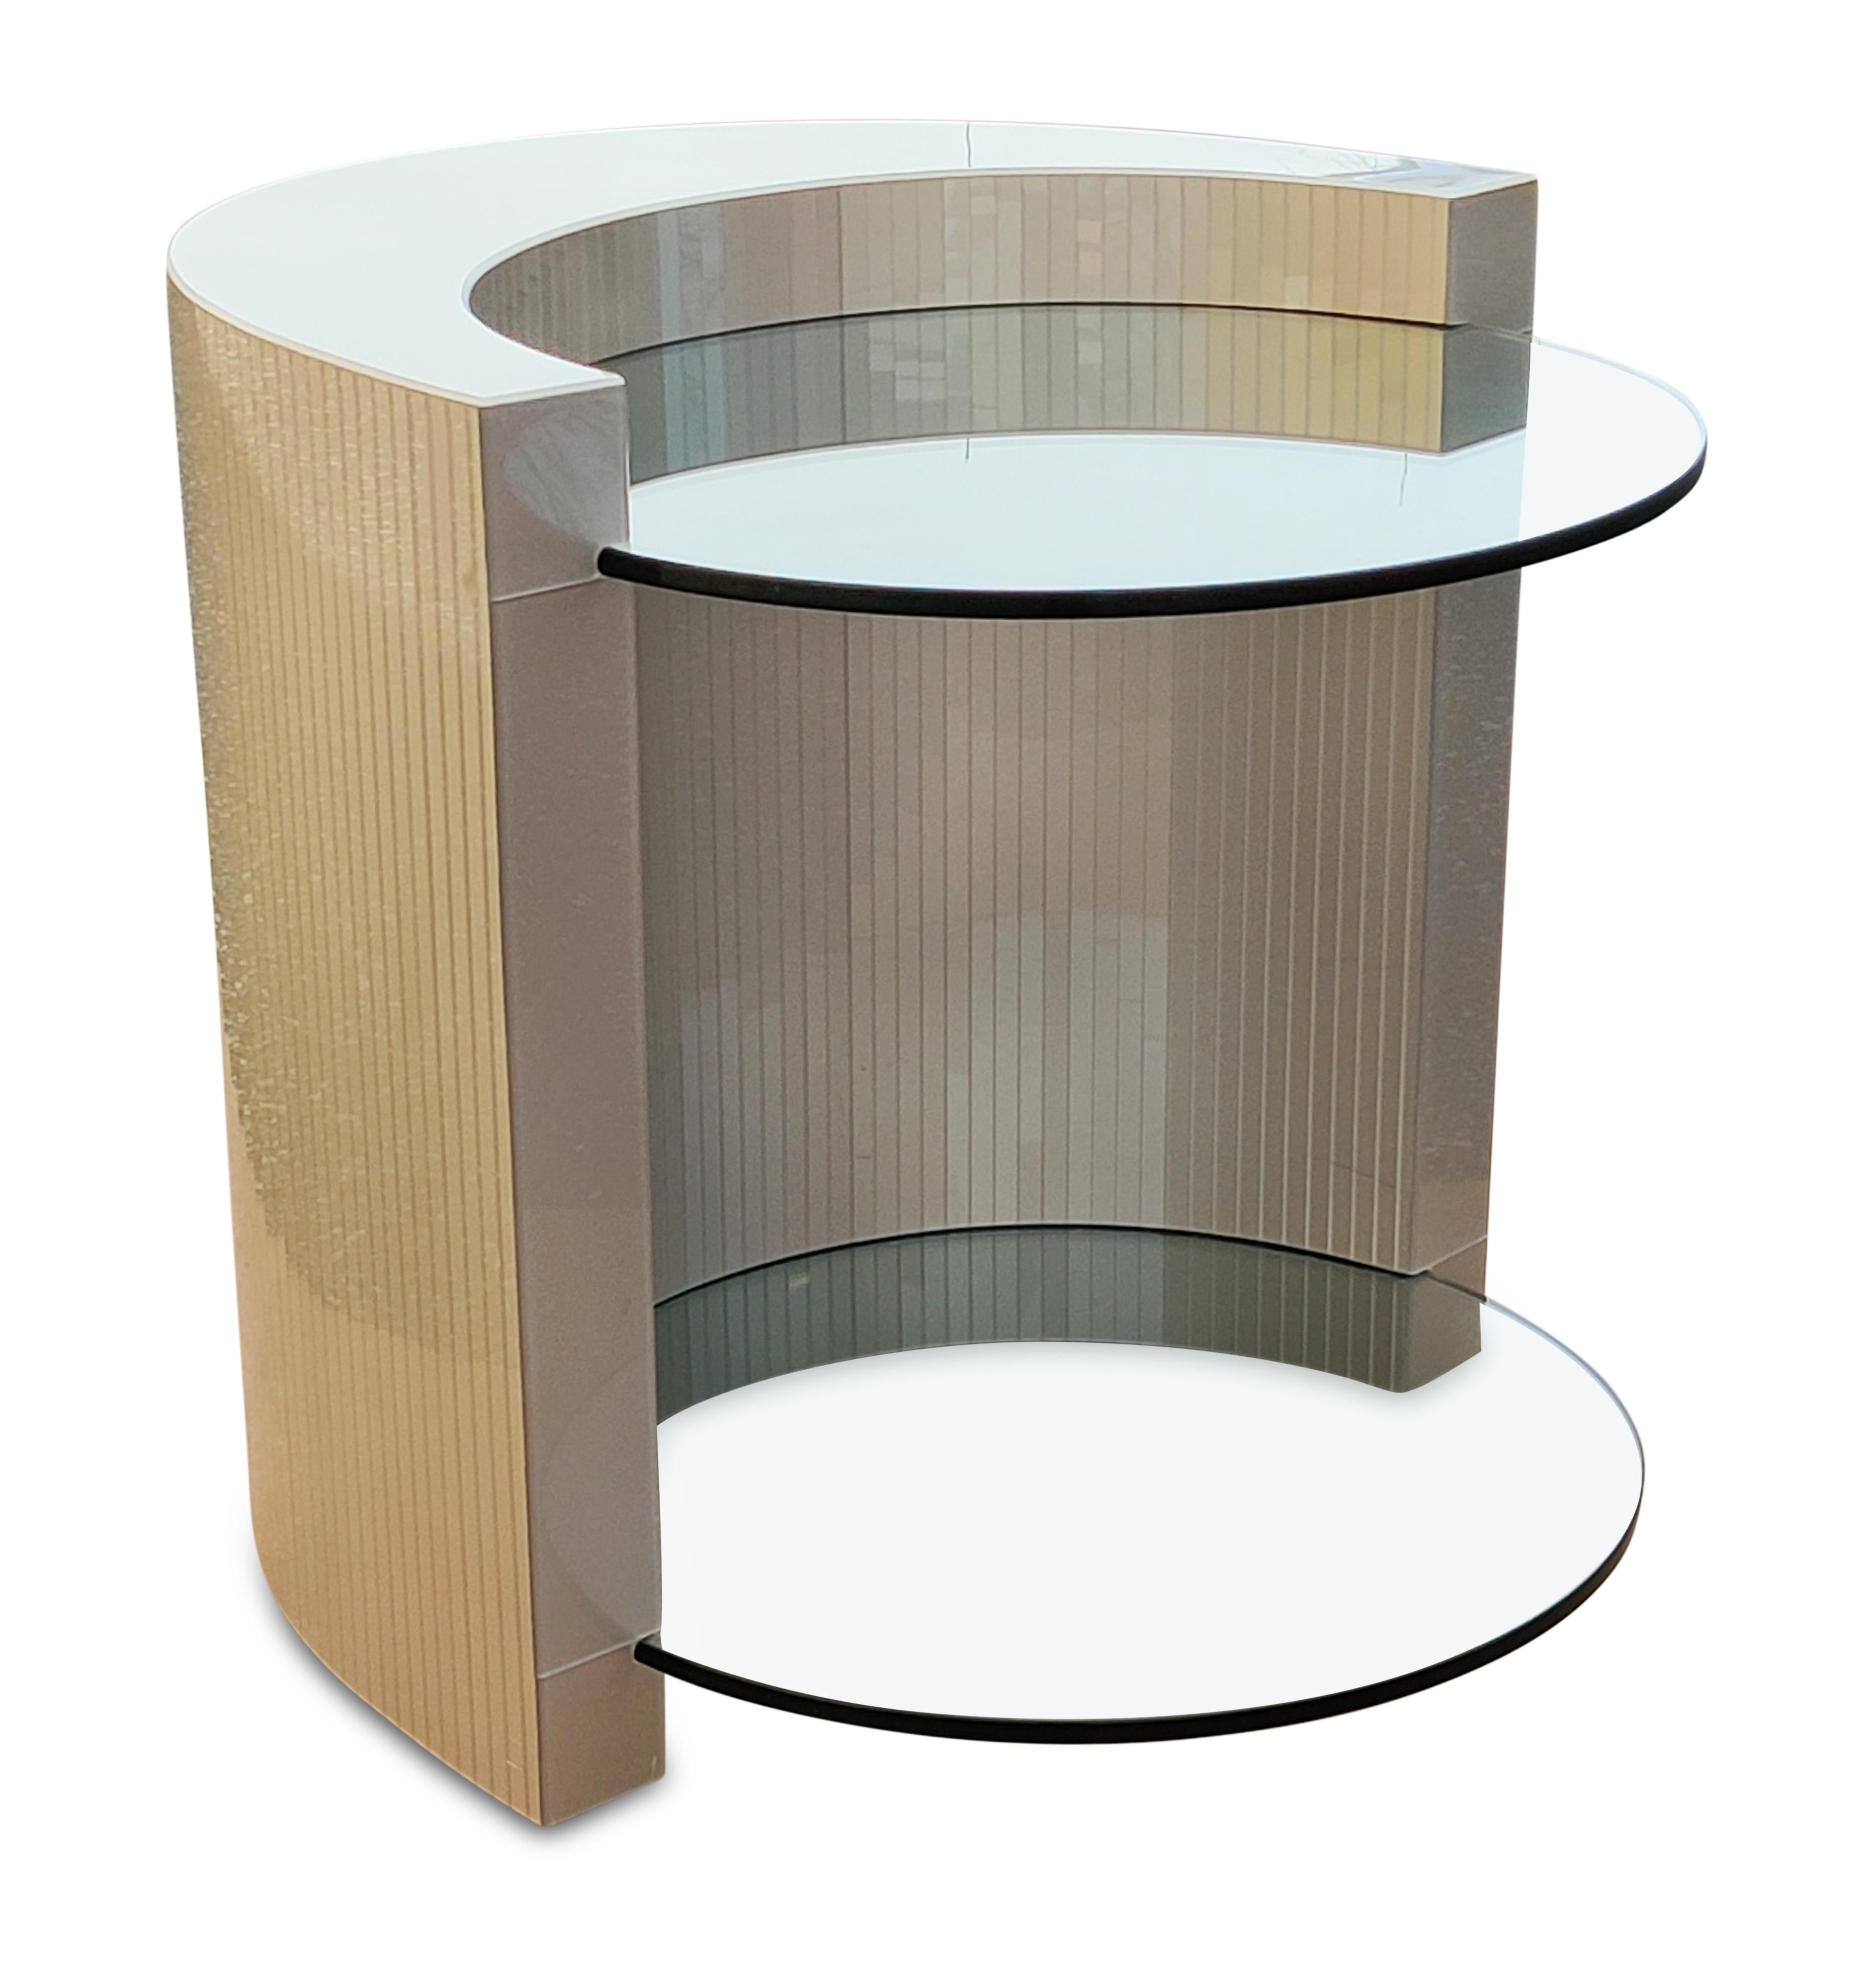 This beautiful side table has unique construction. Shaped like a crescent, it has a curved wood frame overlaid with elegant gray lucite strips. About 3 inches below the top of the crescent and 3 inches above the bottom, there are slots in the base